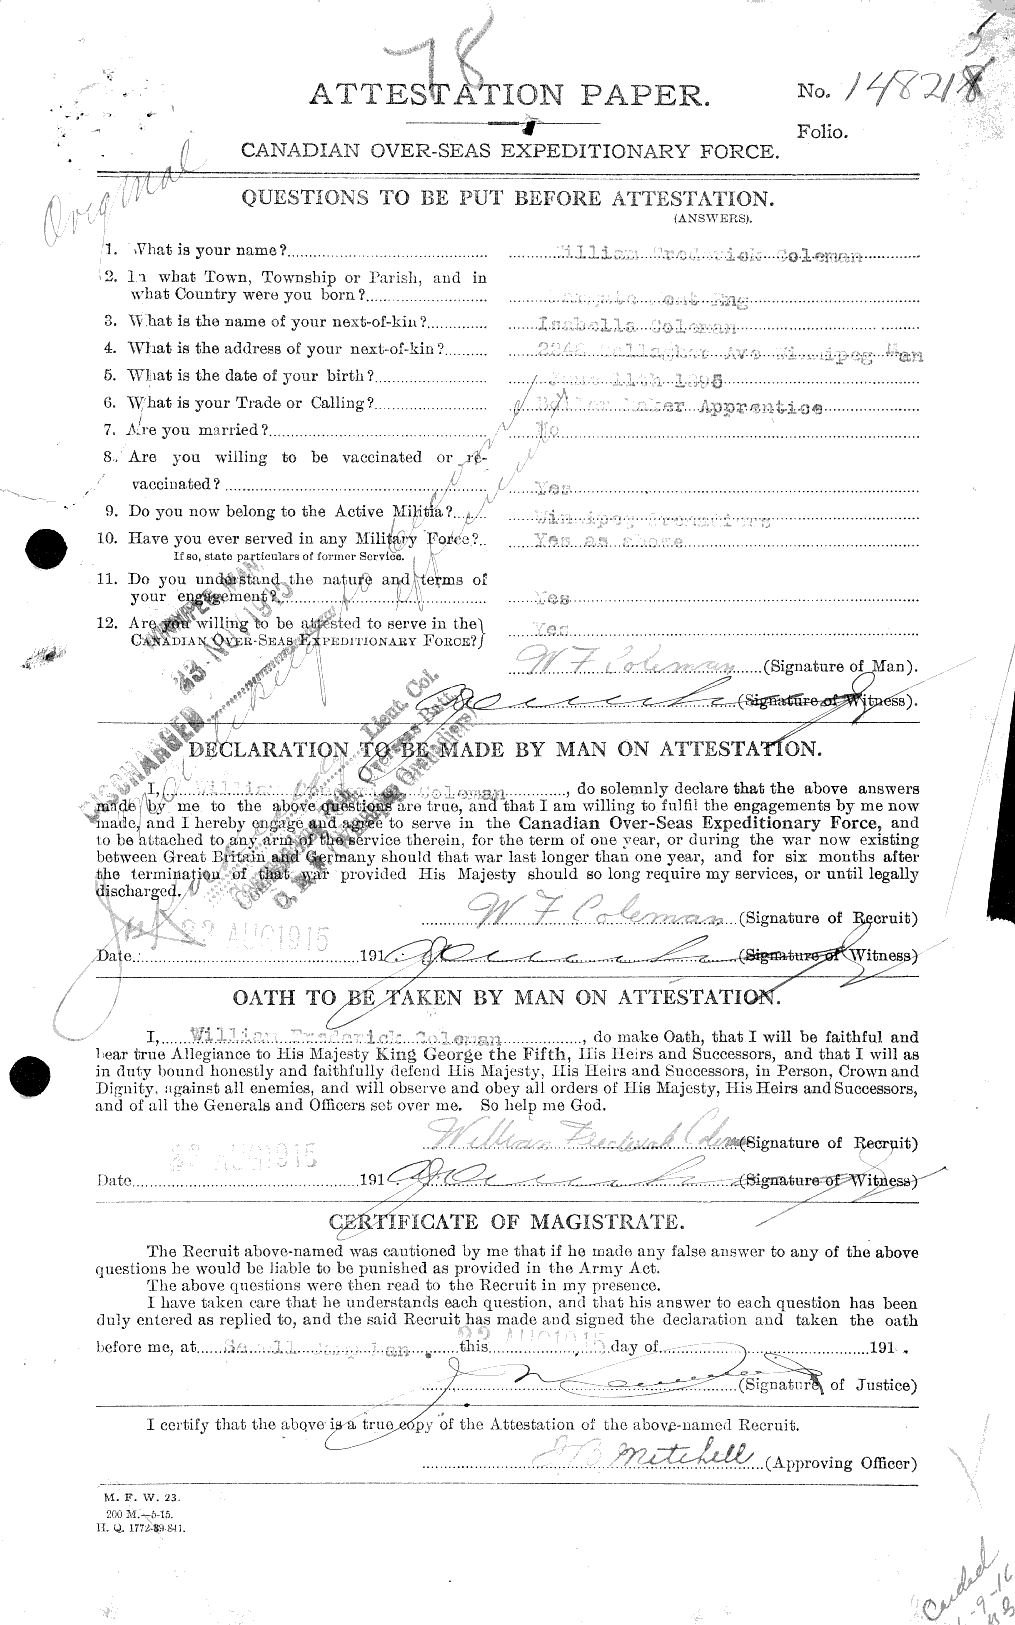 Personnel Records of the First World War - CEF 028310a